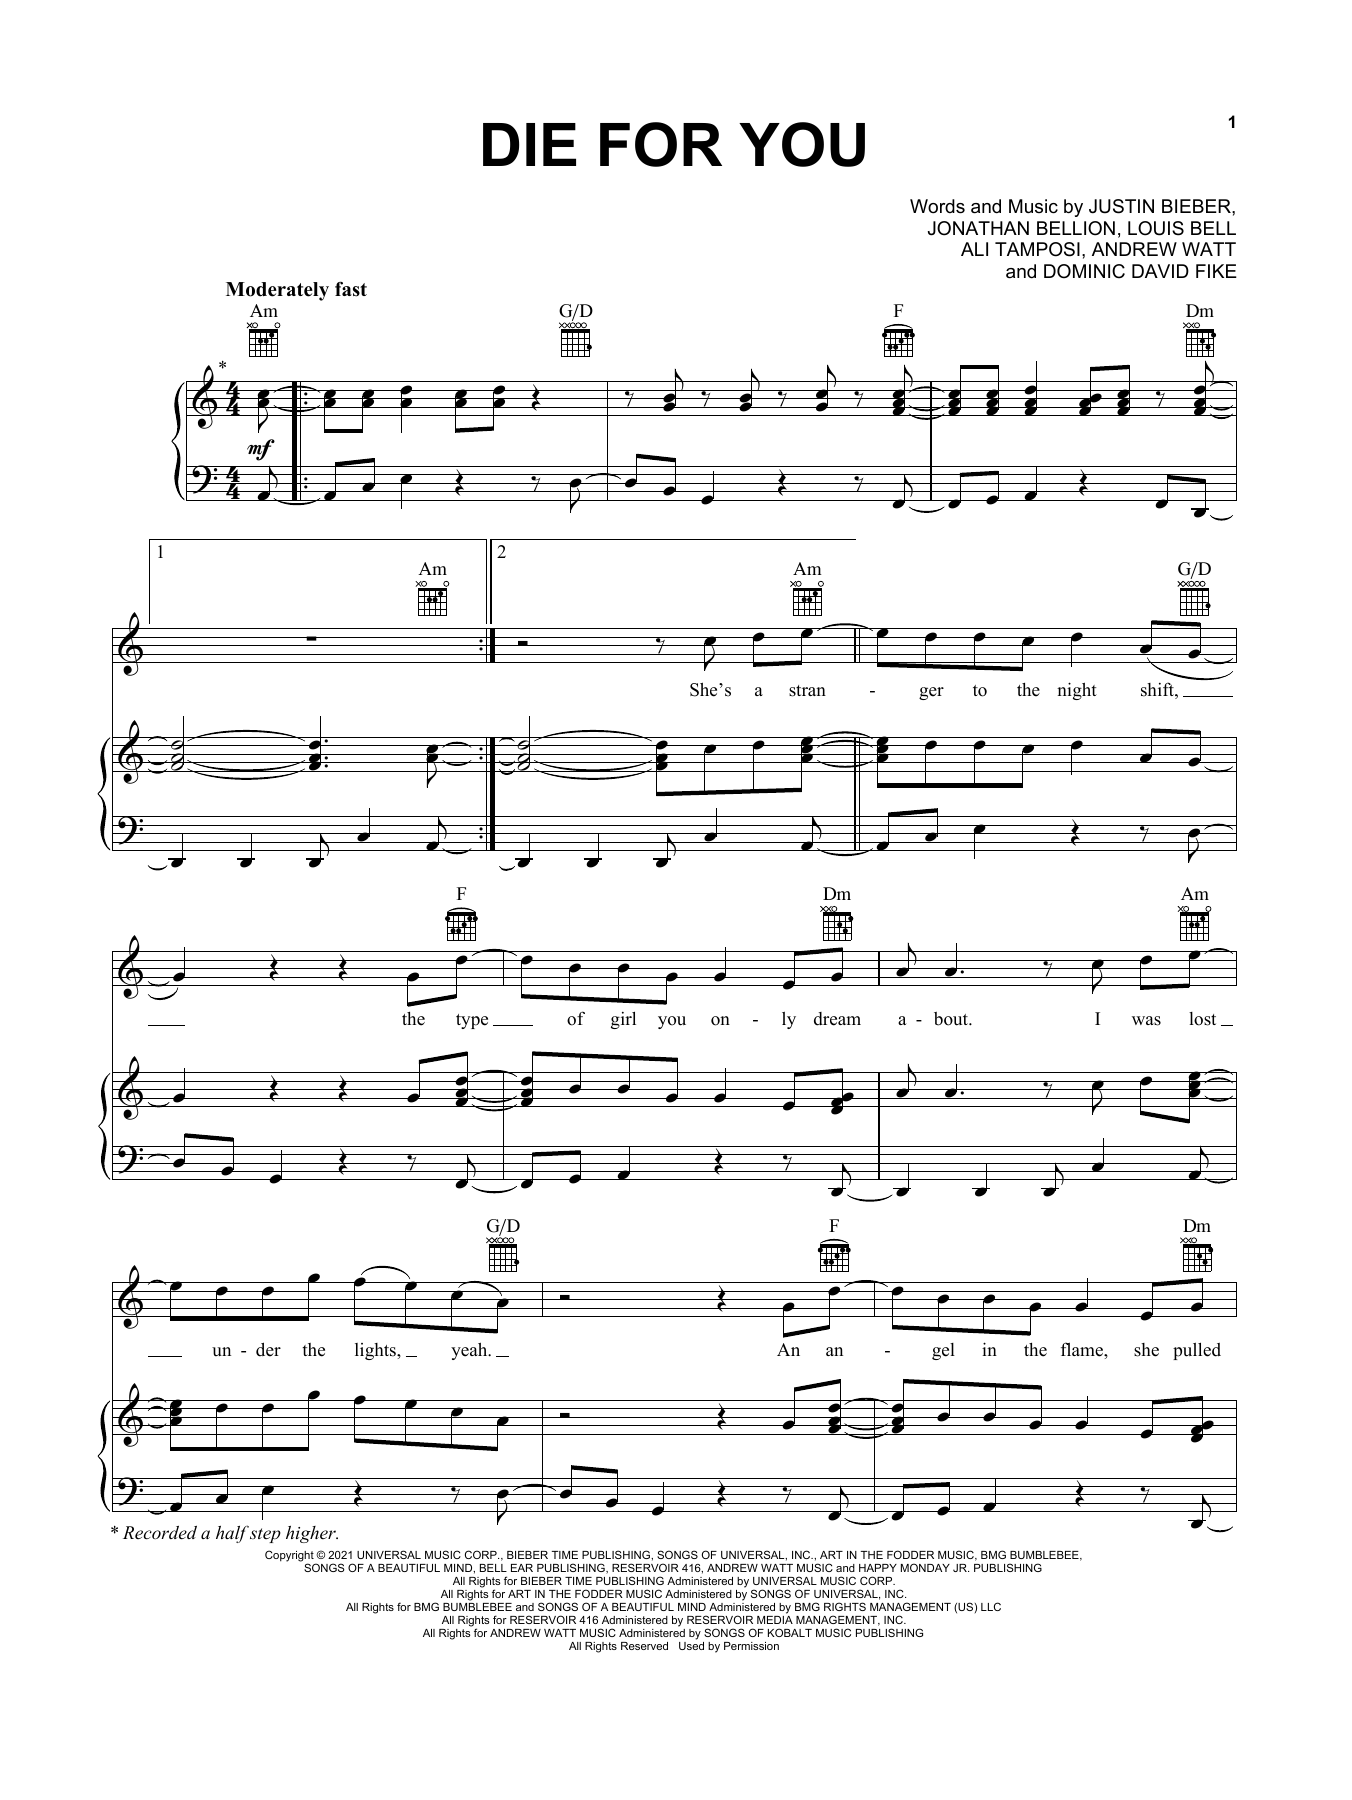 Download Justin Bieber Die For You (feat. Dominic Fike) Sheet Music